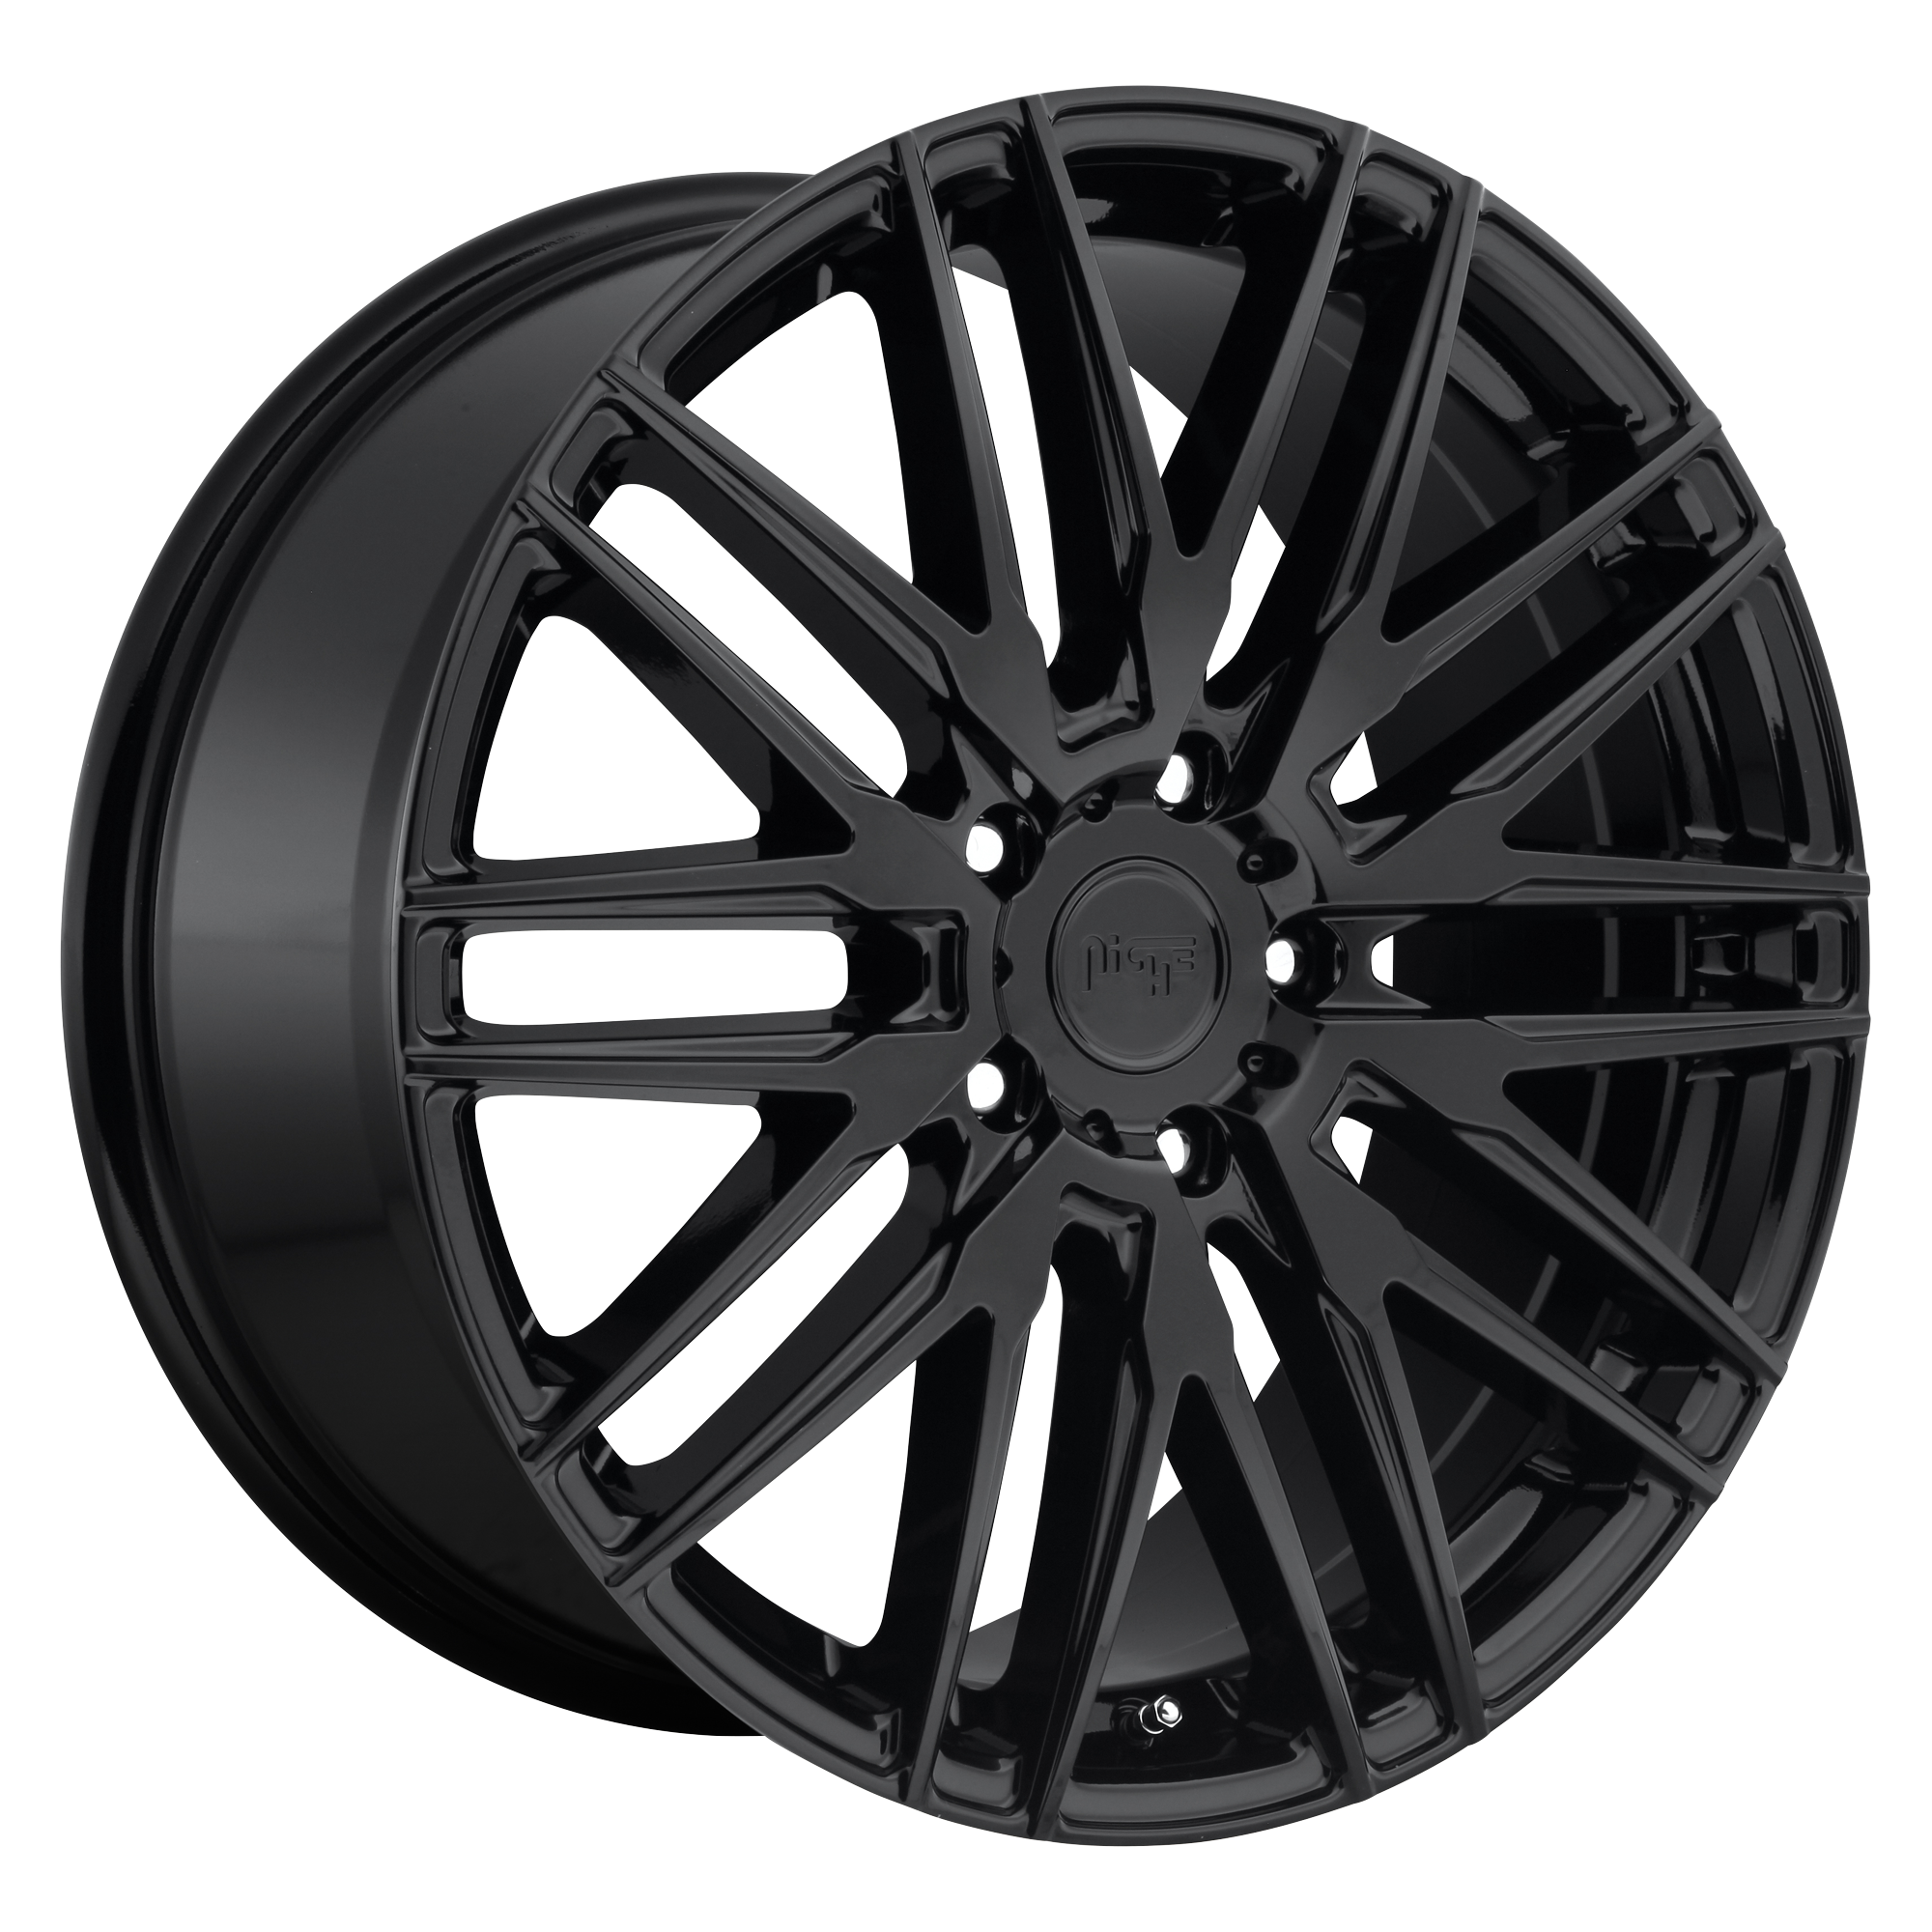 ANZIO 22x9 5x120.00 GLOSS BLACK (38 mm) - Tires and Engine Performance